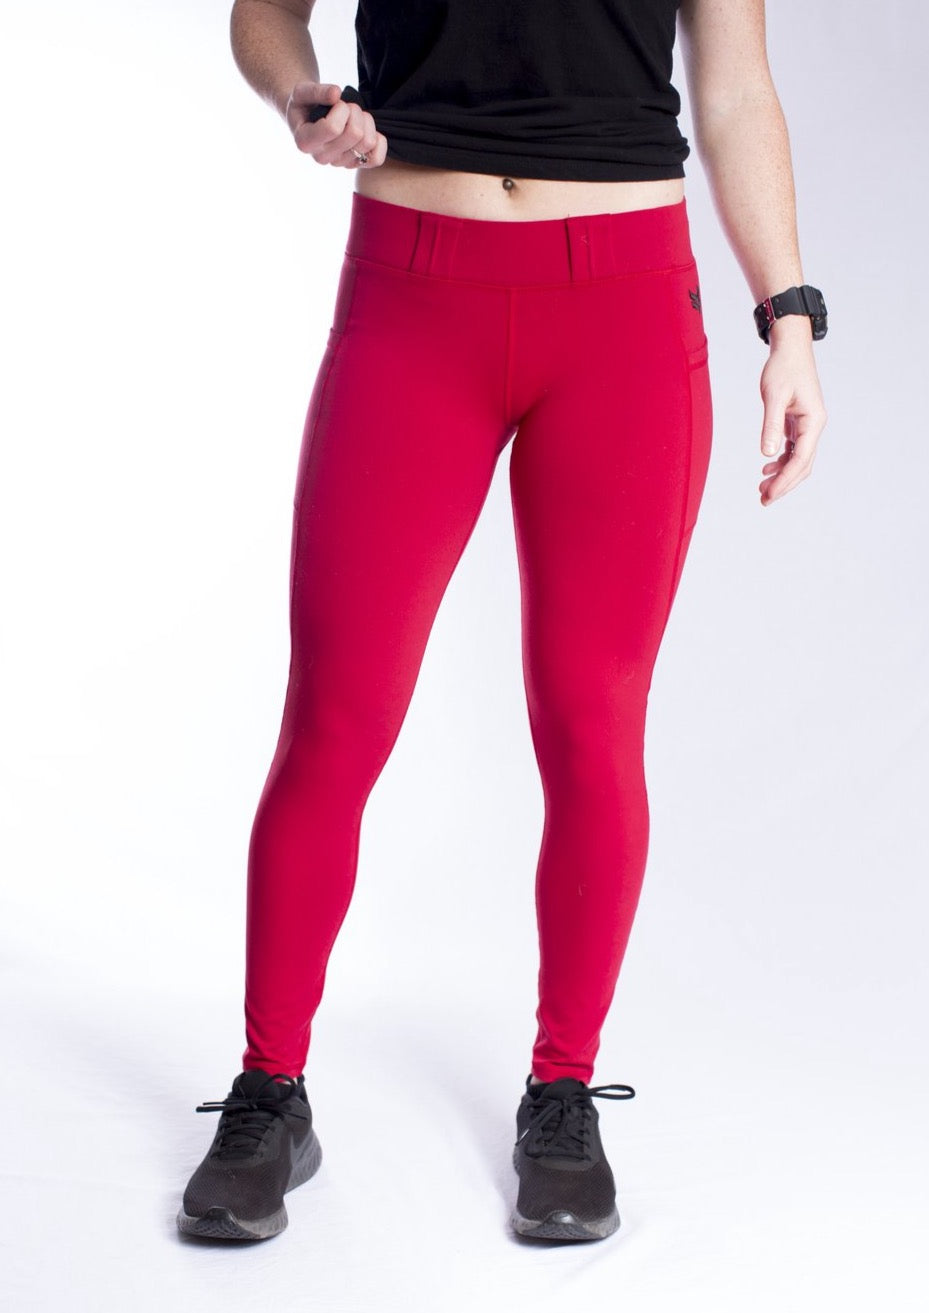 Concealed Carry Leggings, Chili Pepper